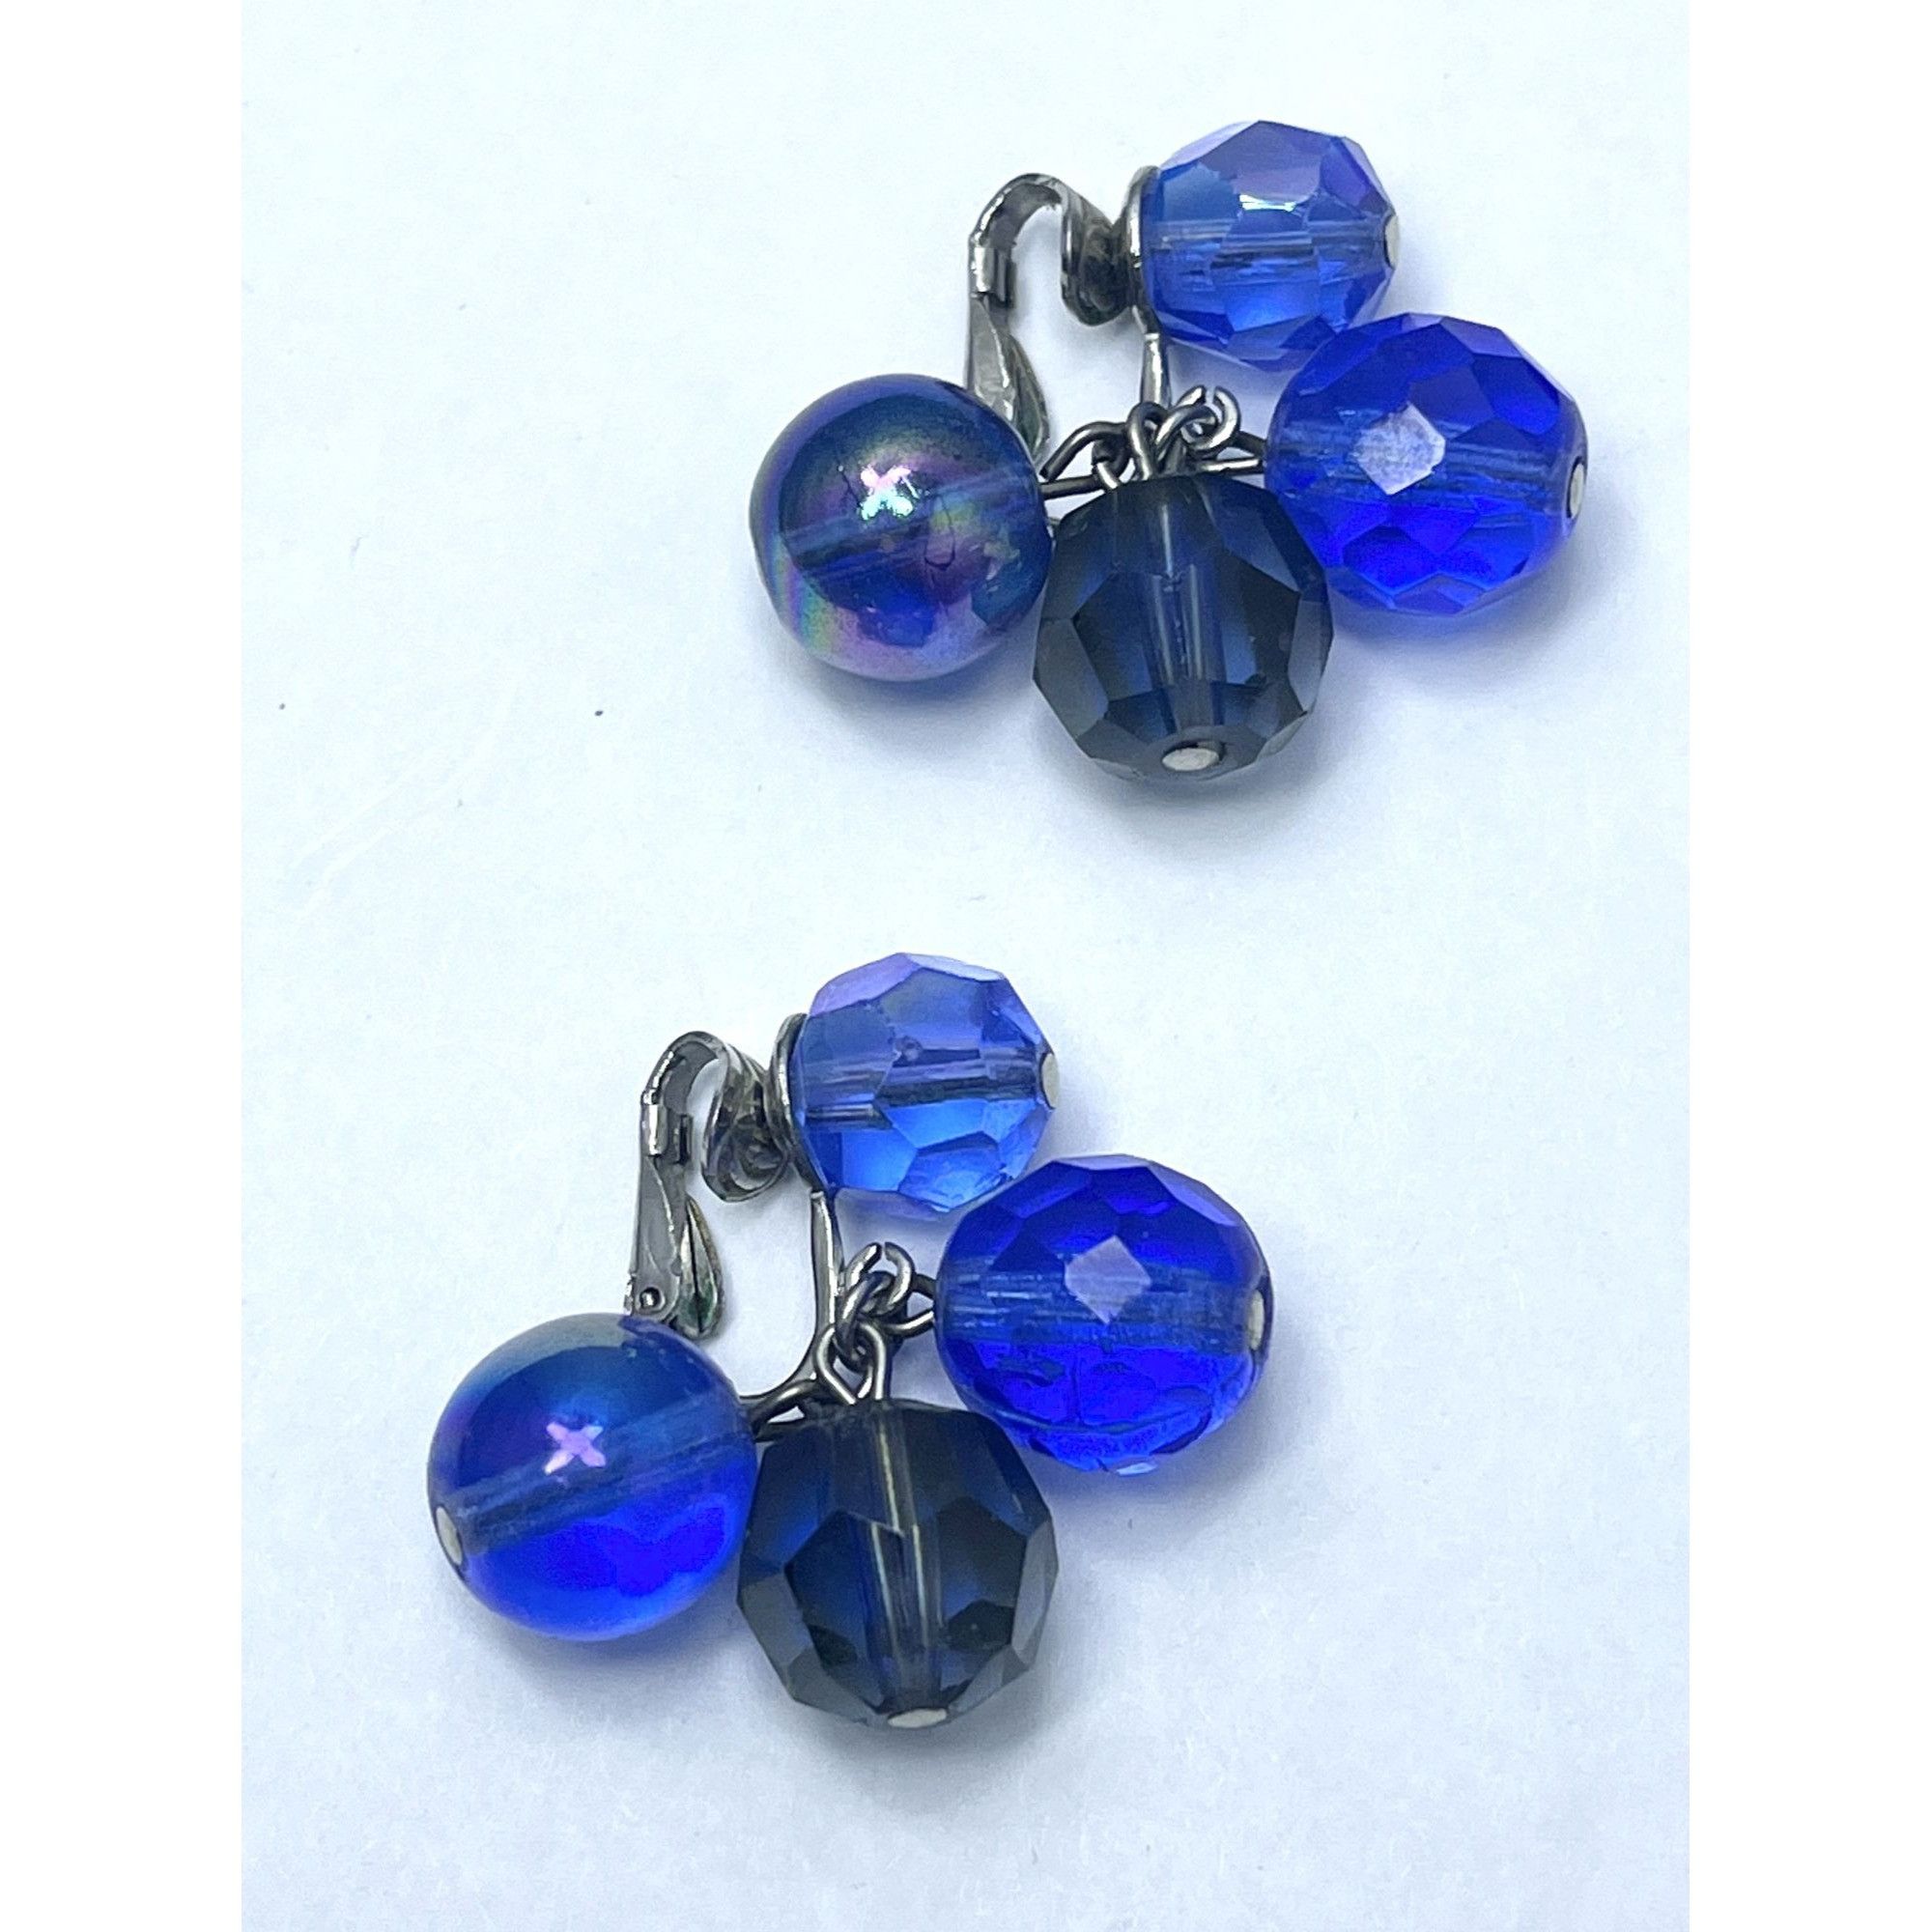 Vogue Vintage Vogue Blue Crystal Glass Earrings Size ONE SIZE - 2 Preview